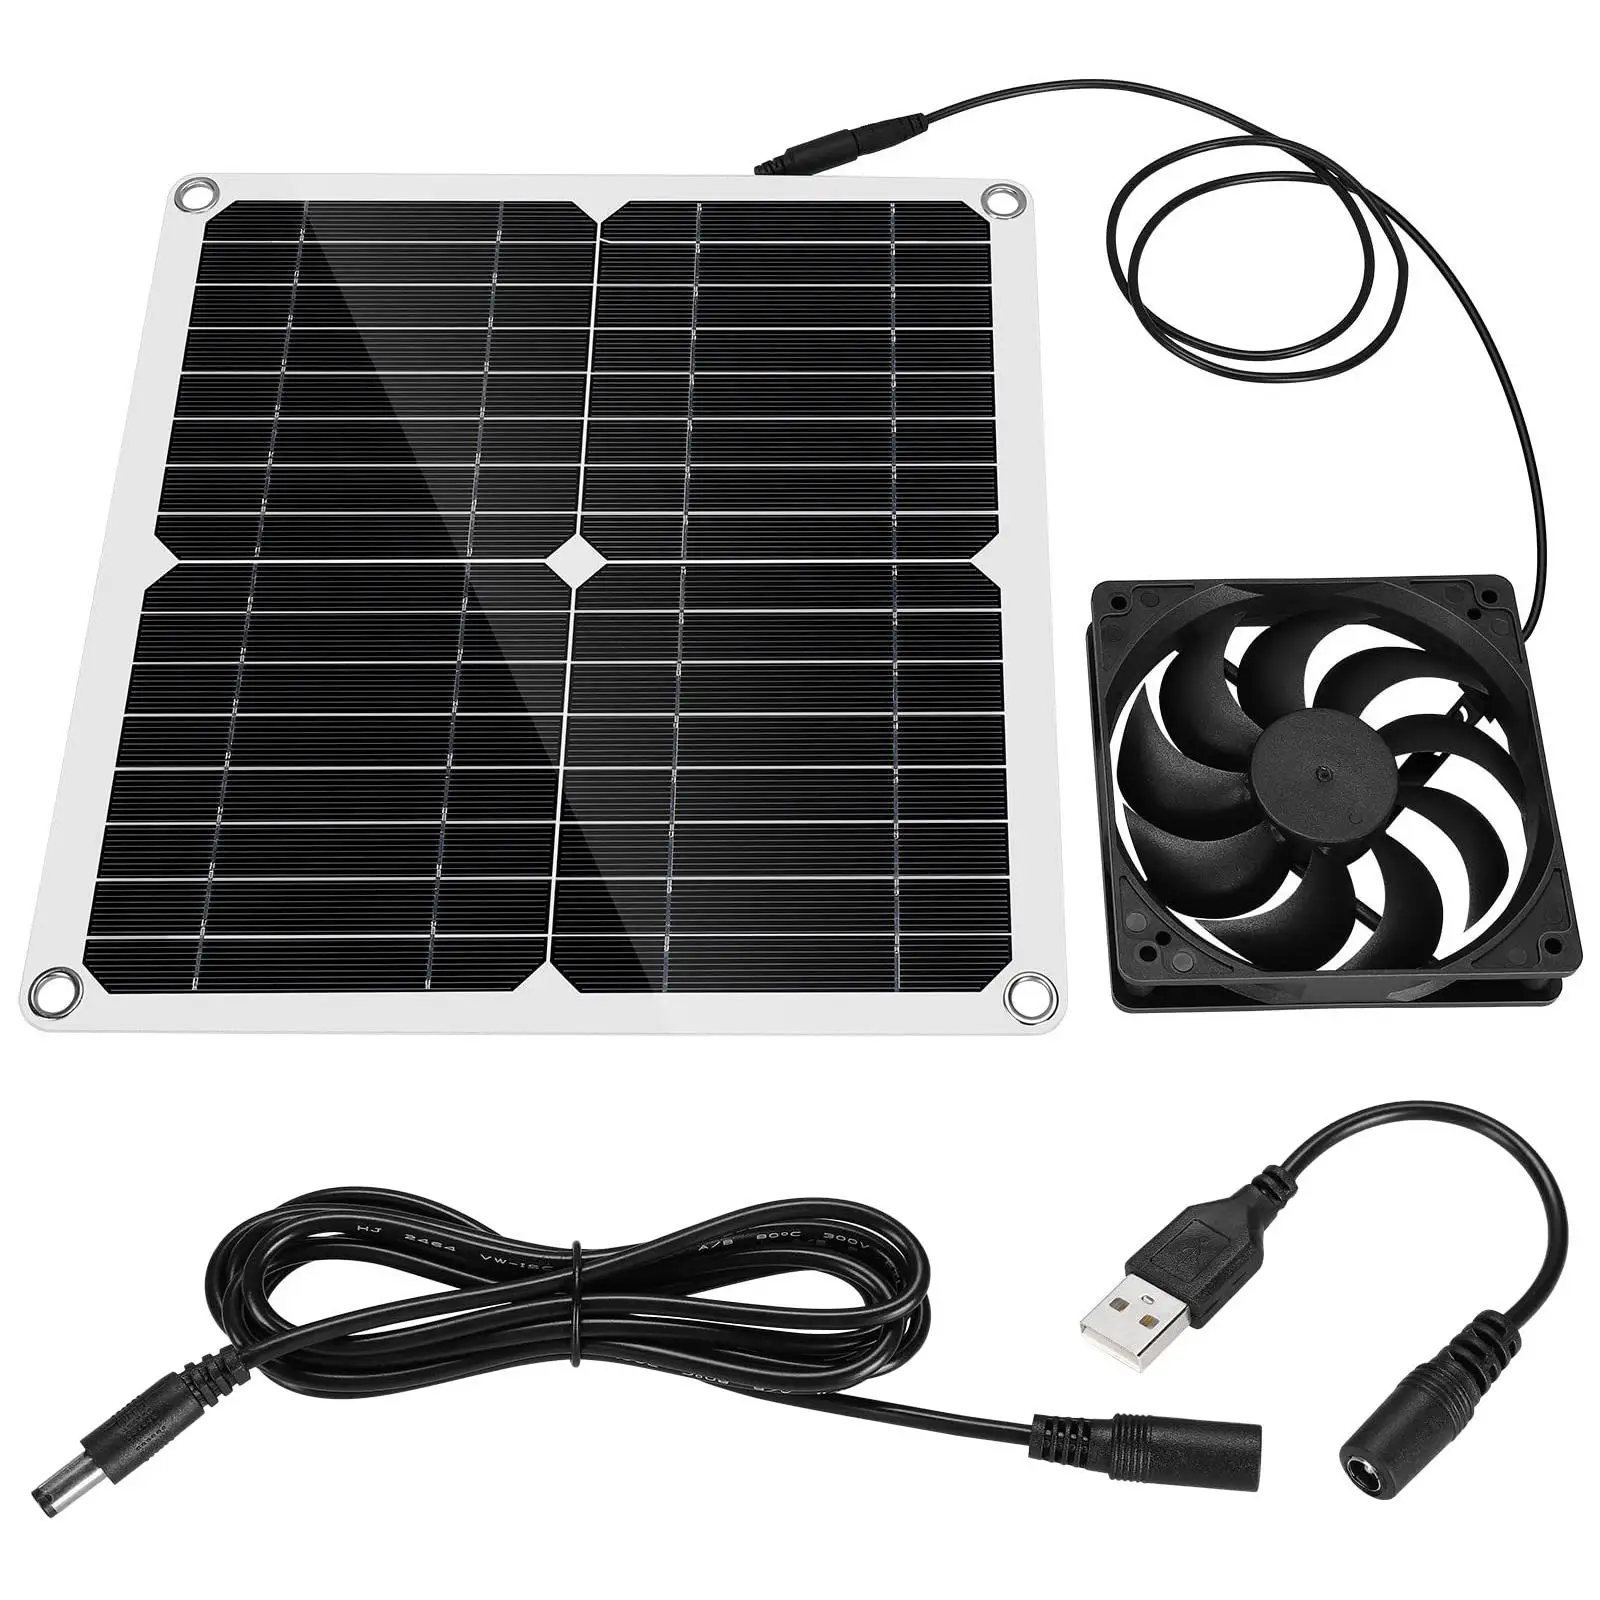 12W Solar Exhaust Fan Outdoor Cooling 12V Ventilation Portable Mini Ventilator for Greenhouse Chicken House Home Camping Rvs